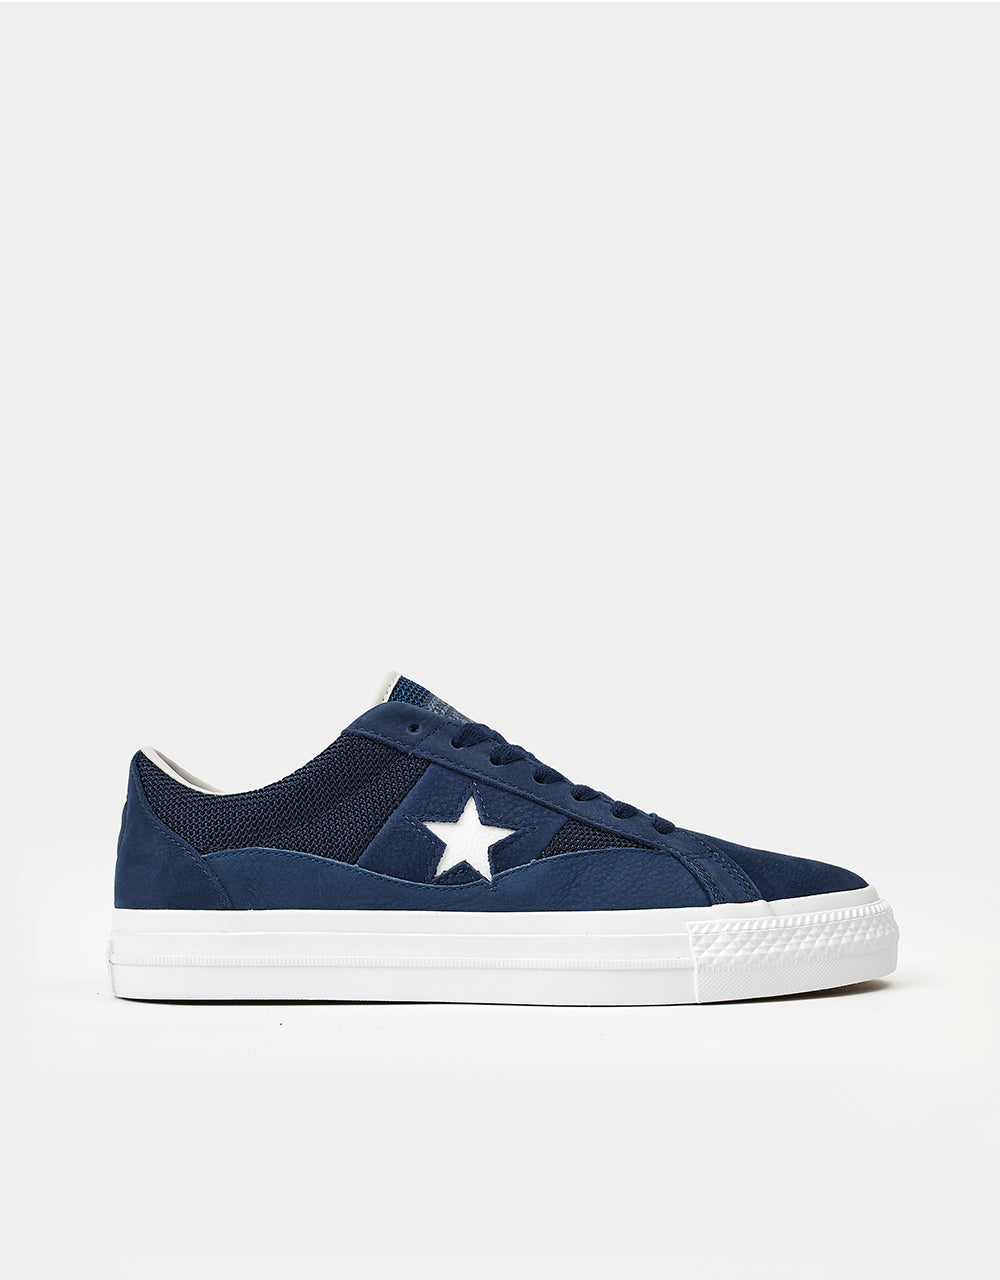 Converse x Alltimers One Star Pro Skate Shoes - Midnight Navy/Navy